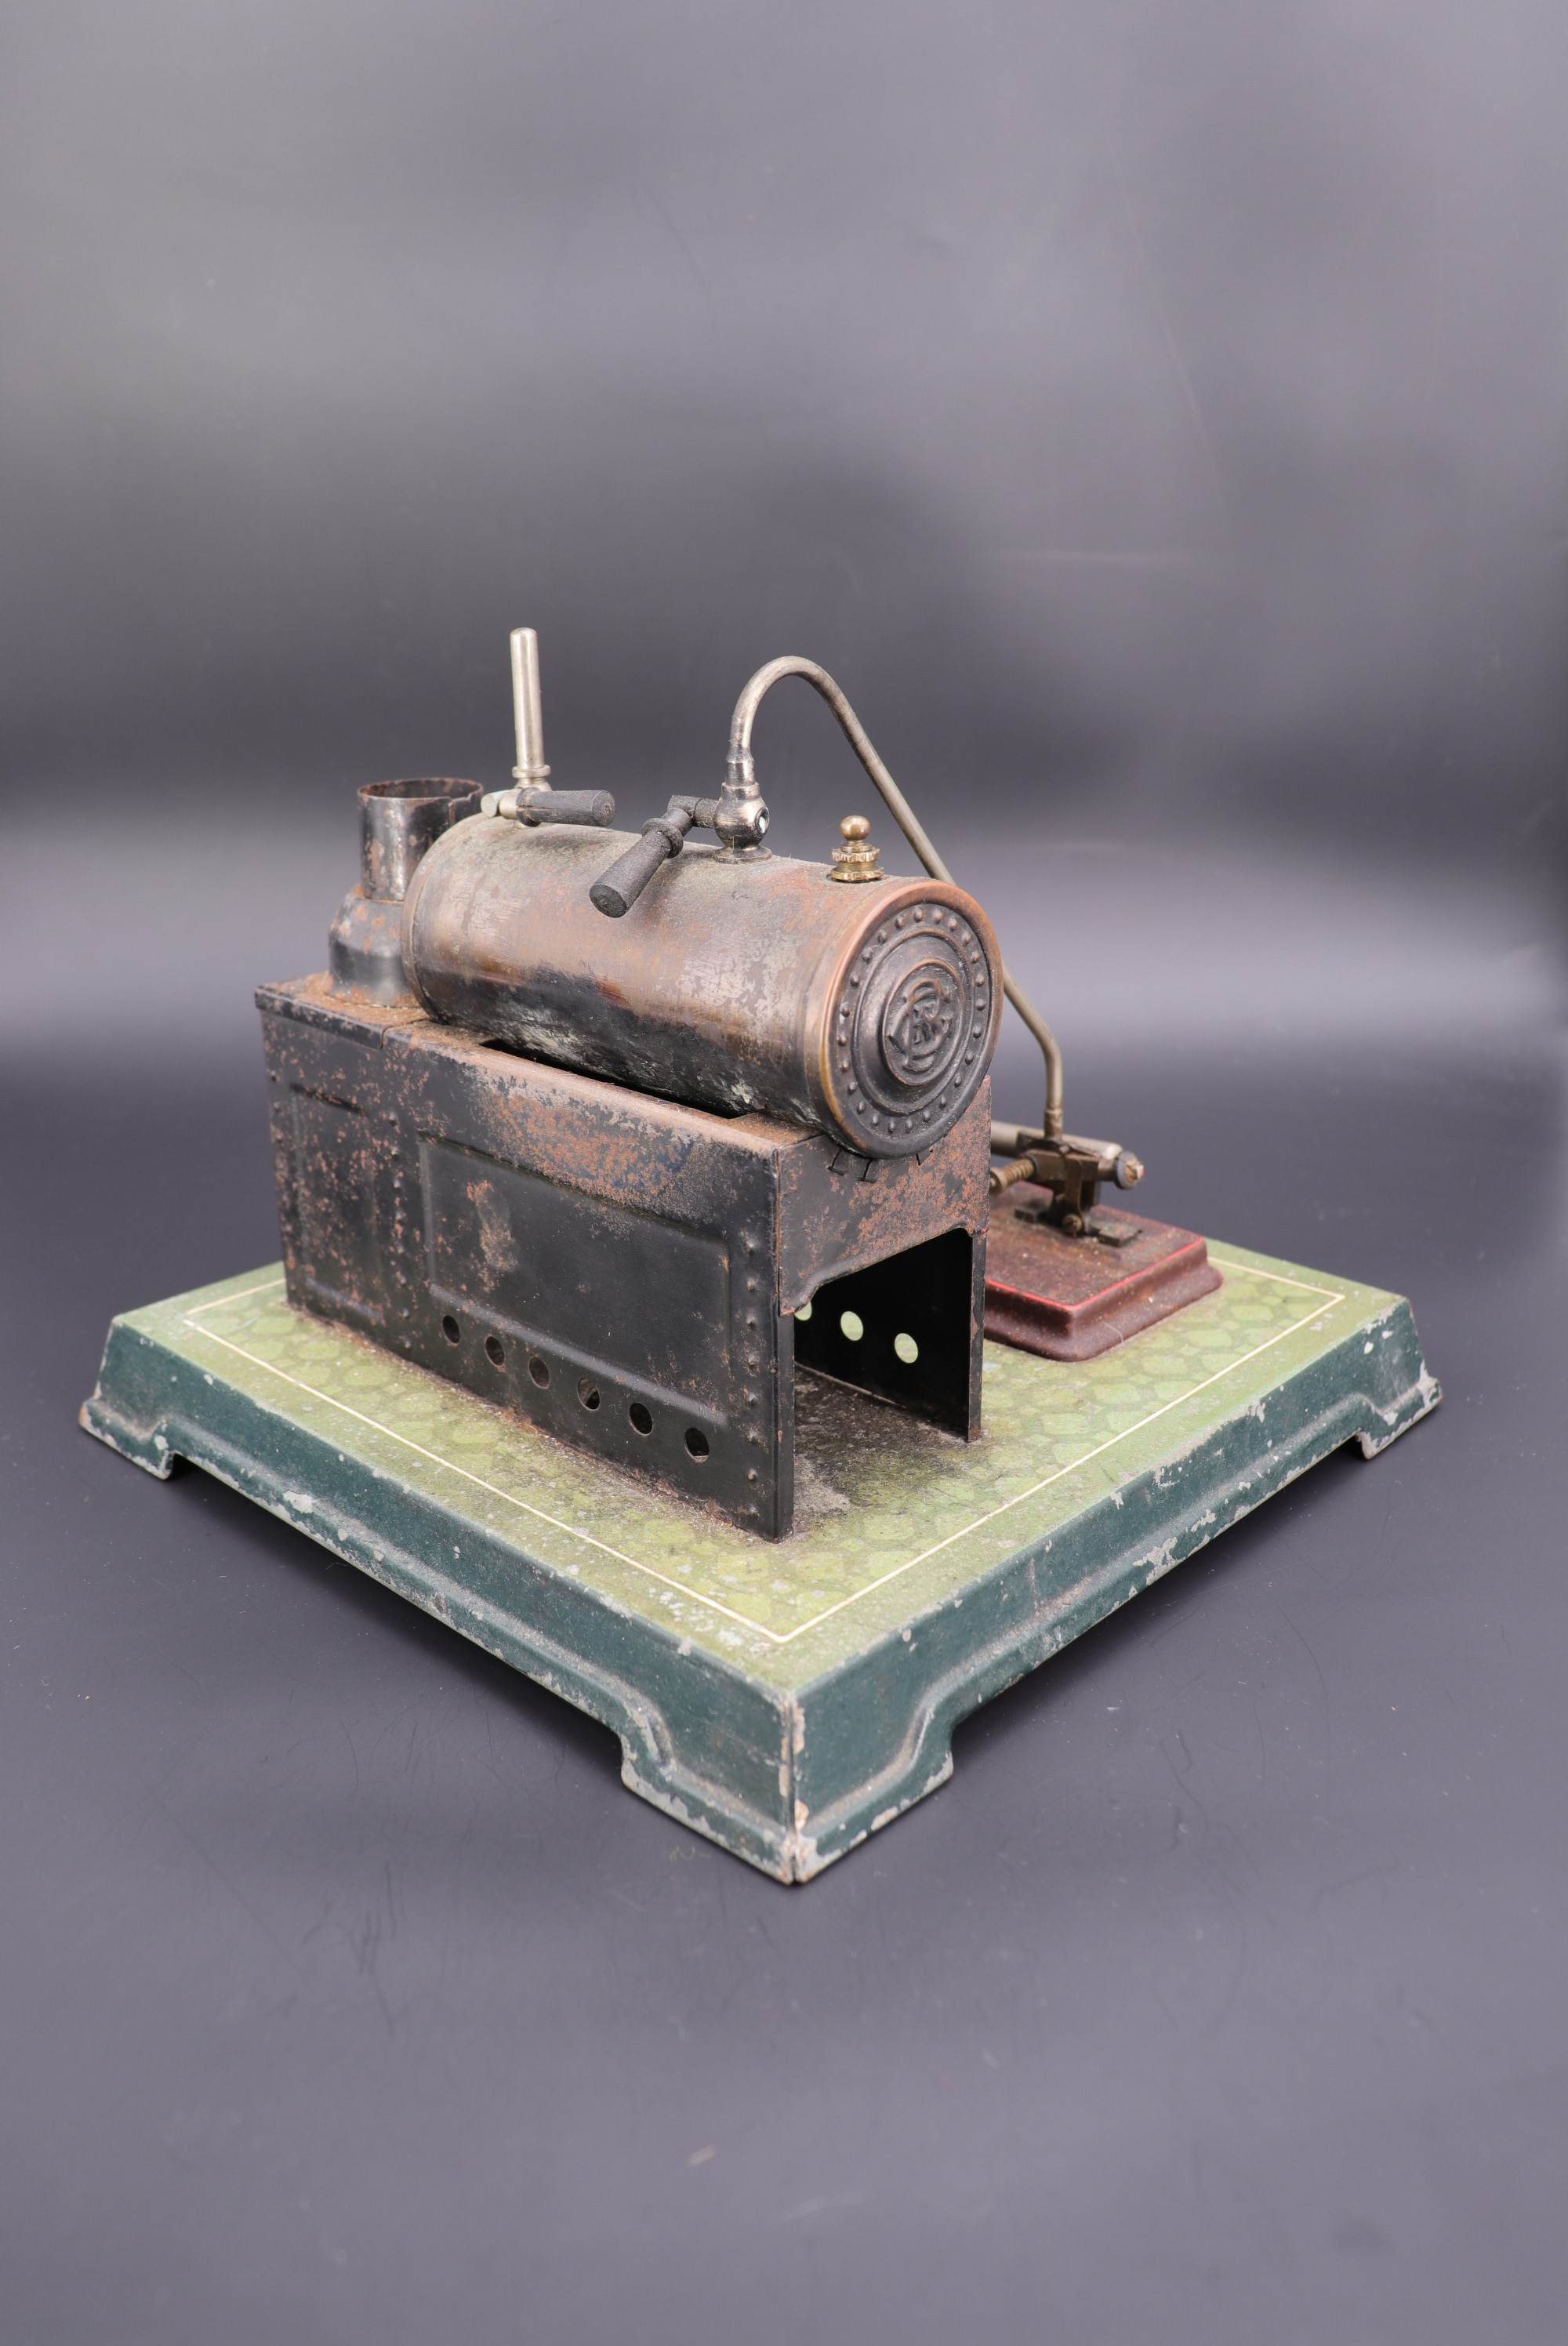 A Bing horizontal live steam engine with reverse function, 22 cm x 22 cm - Image 2 of 2